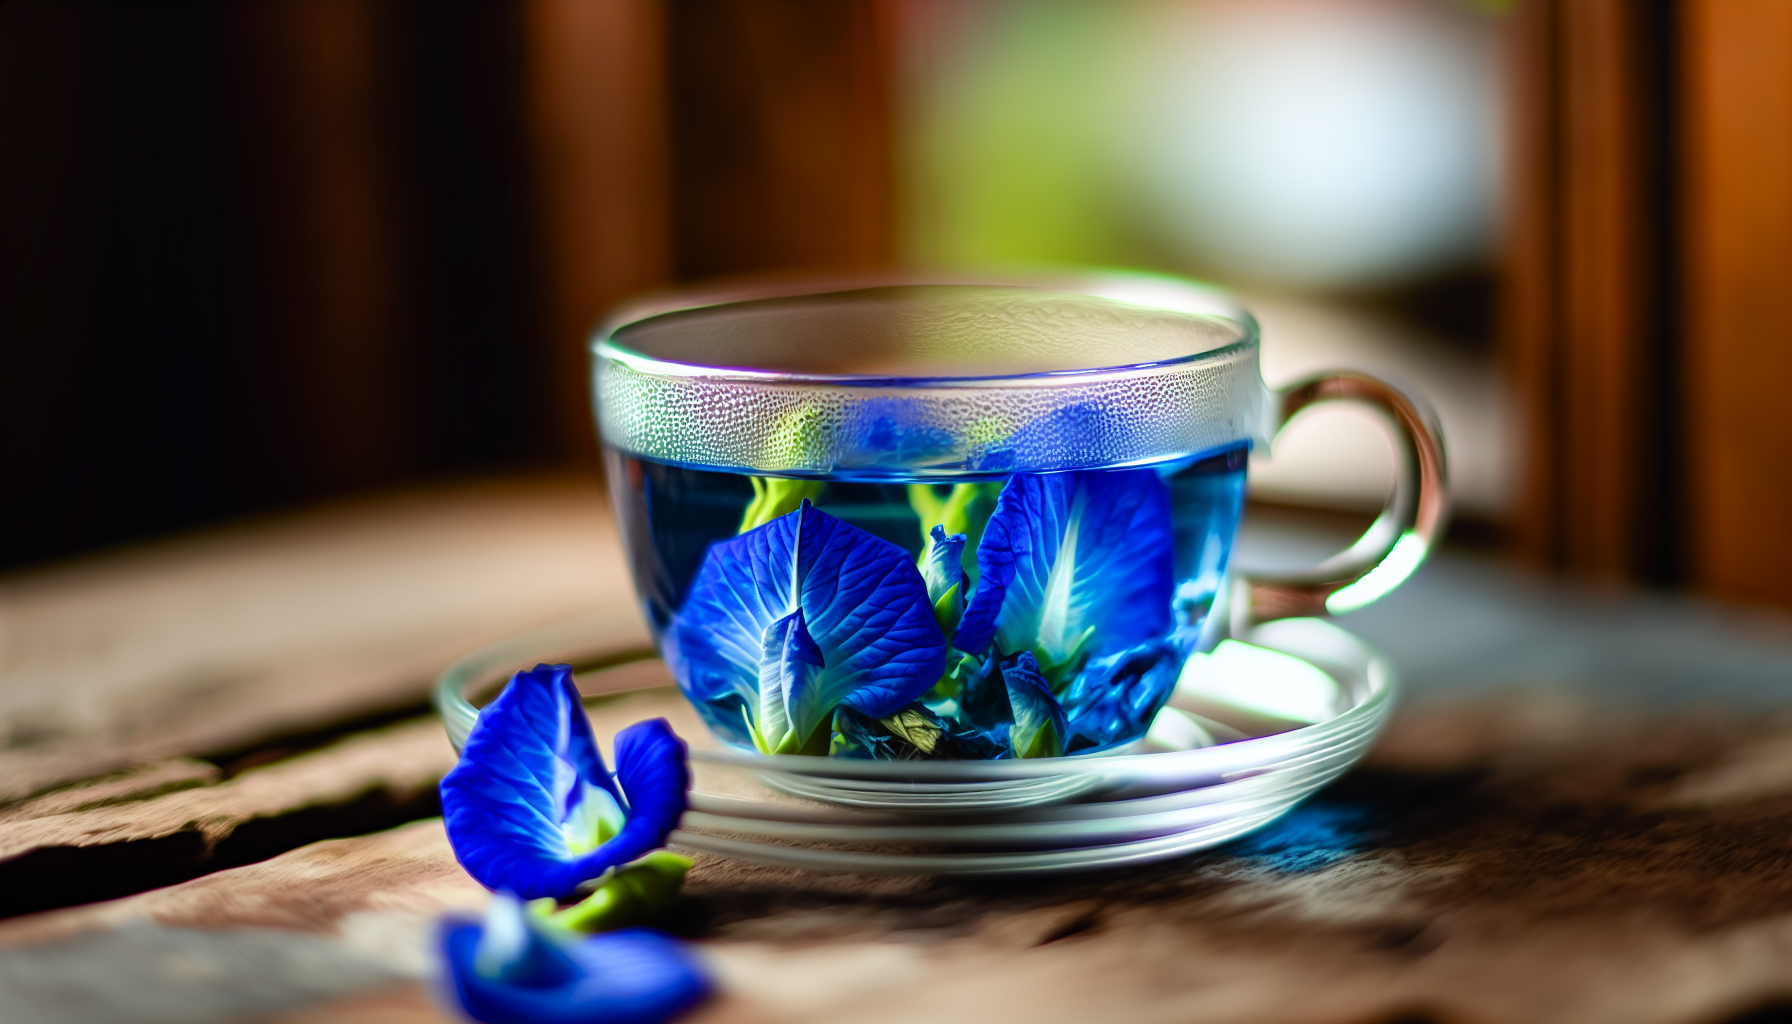 Vibrant blue butterfly pea flowers in a teacup